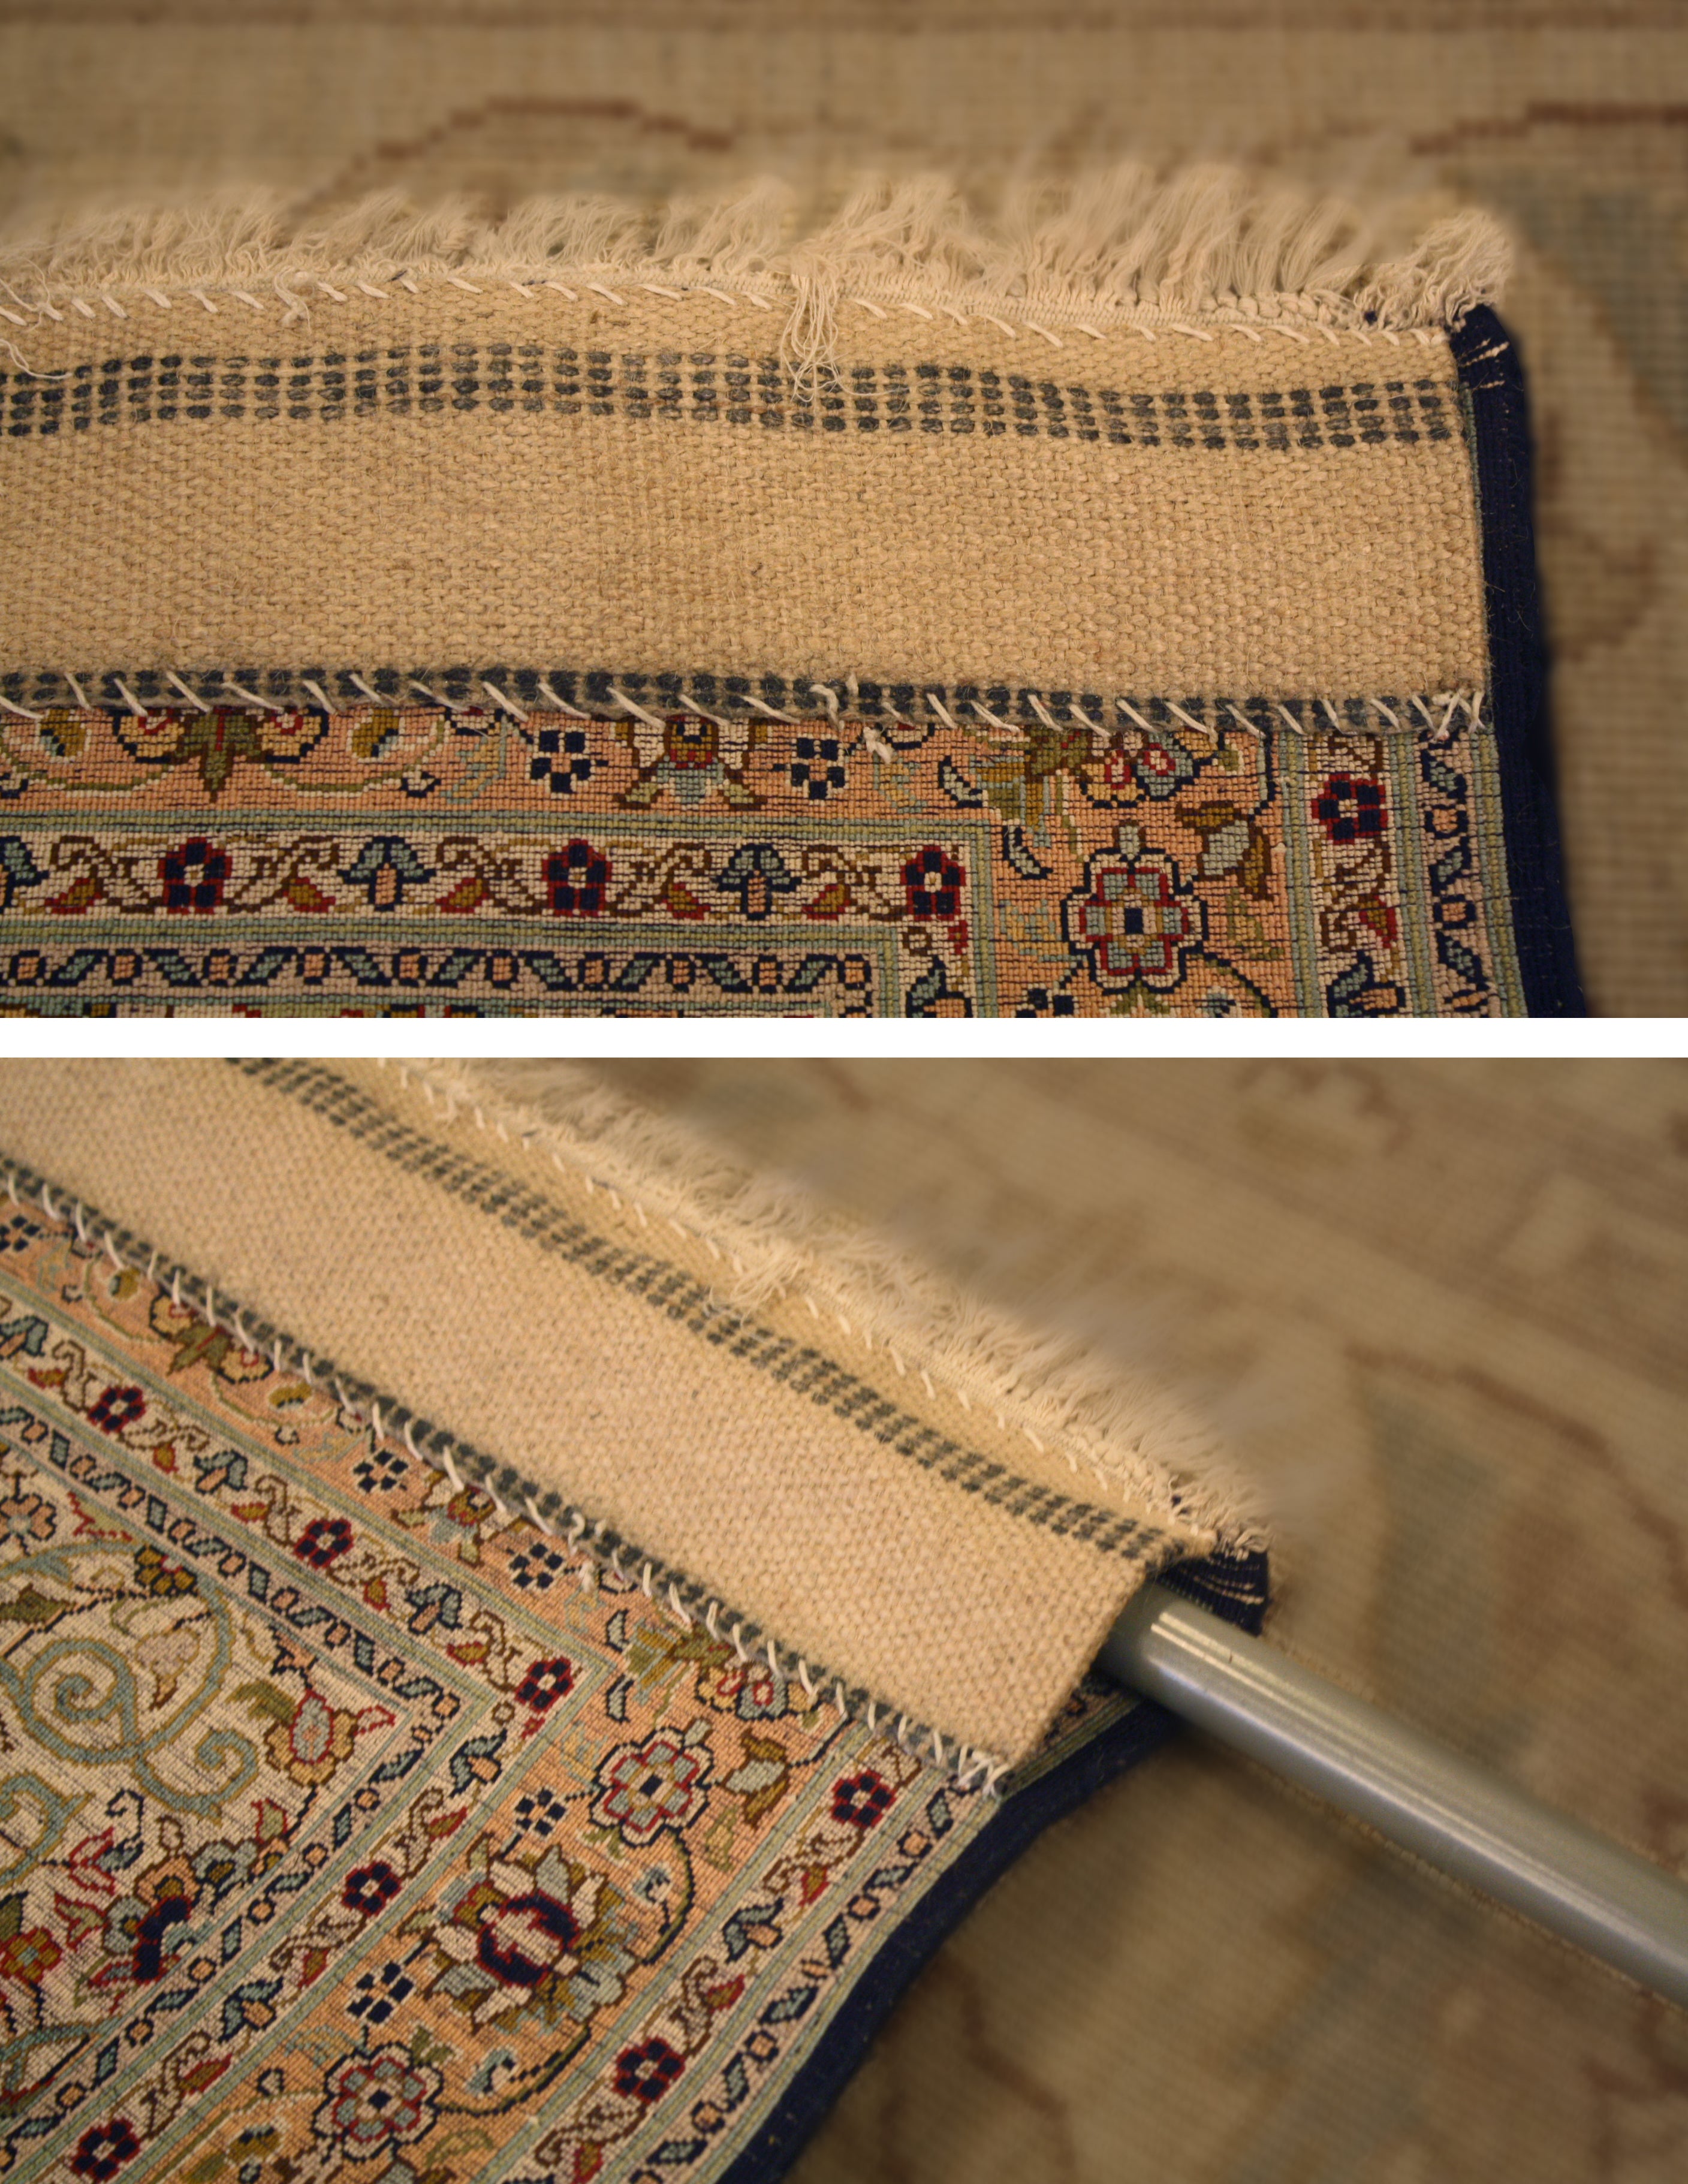 How to hang a rug with curtain rod